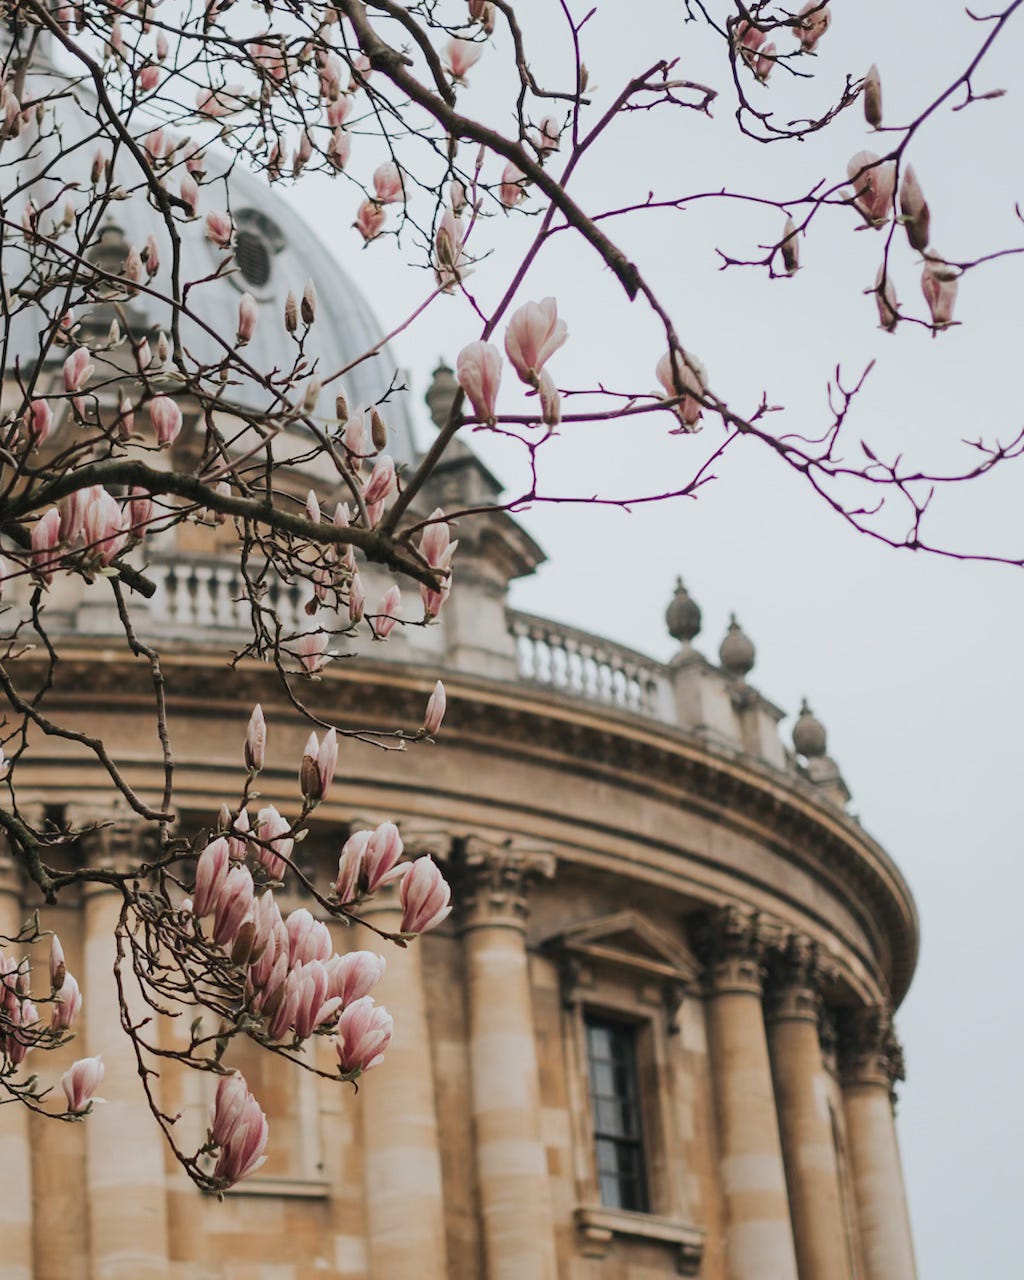 Pink magnolia blossom with Oxford's Radcliffe Camera in the background